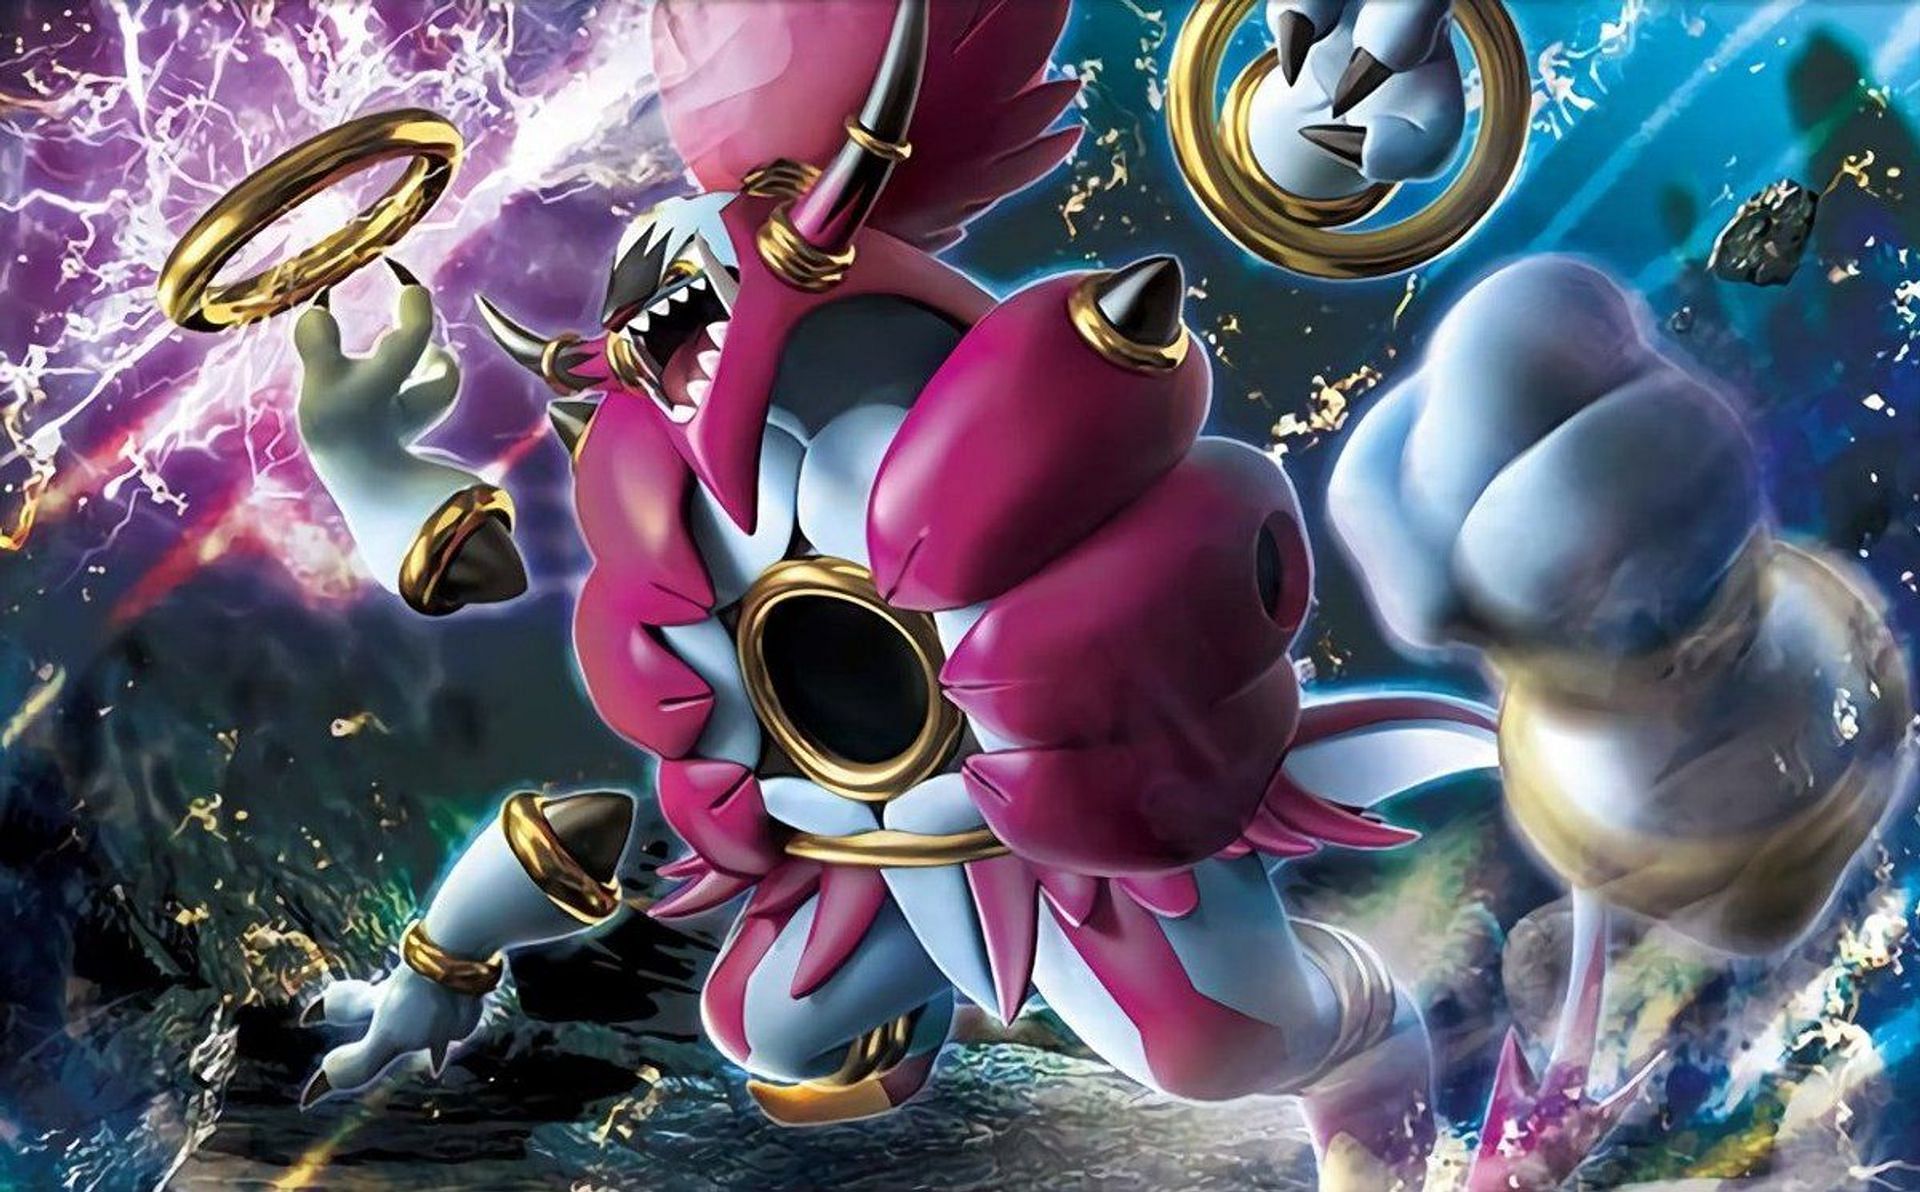 Hoopa Unbound as it appears in the trading card game (Image via The Pokemon Company)